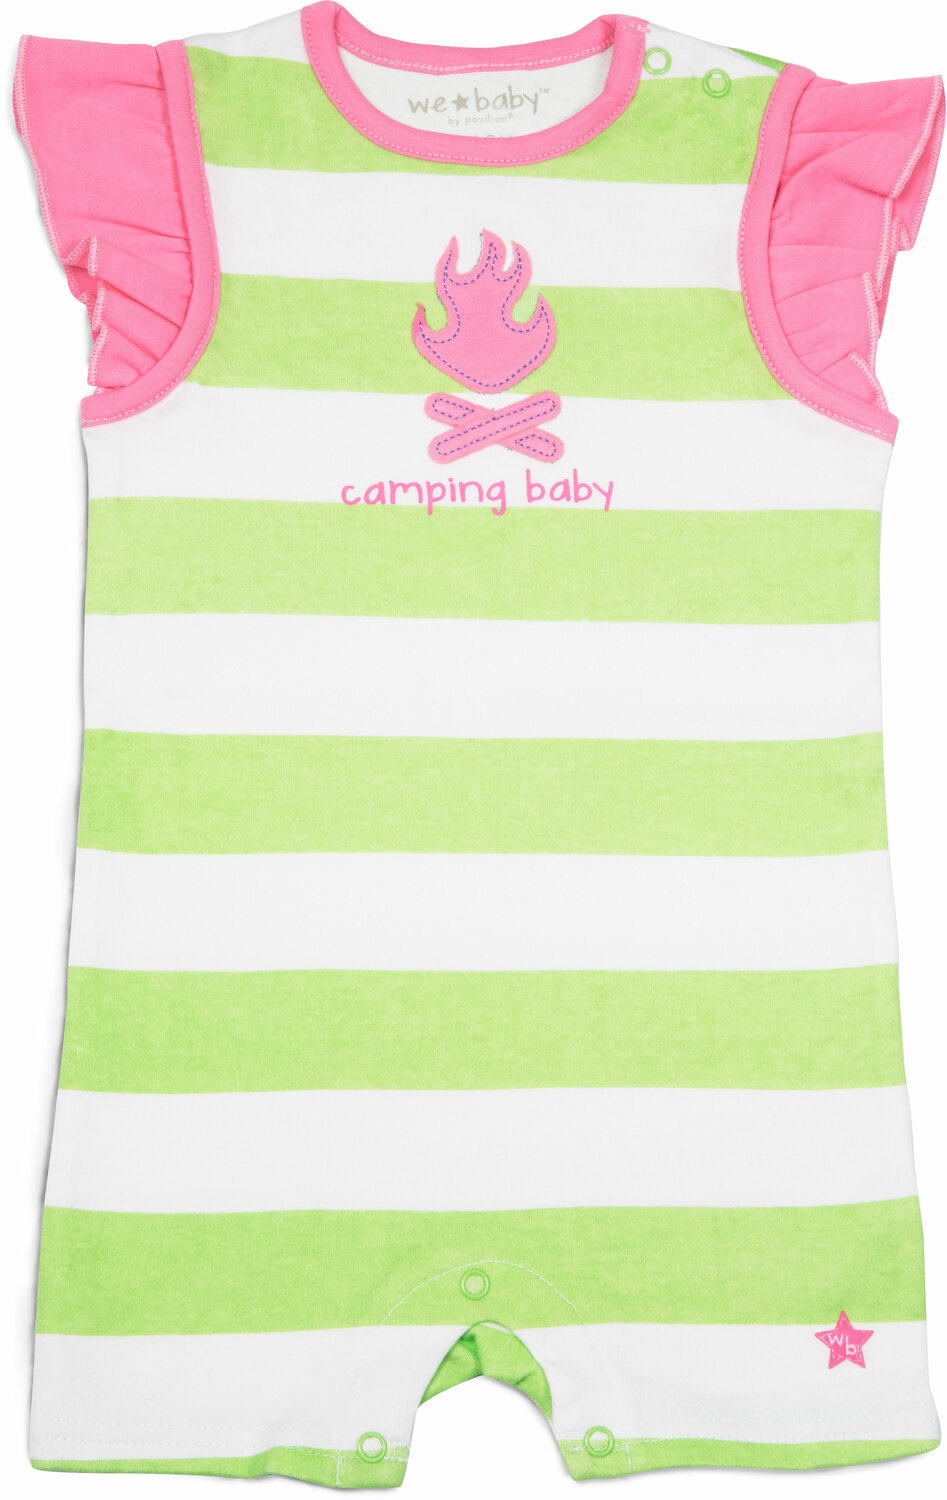 Camping Baby by We Baby - Camping Baby - 6-12 Month Girl Romper